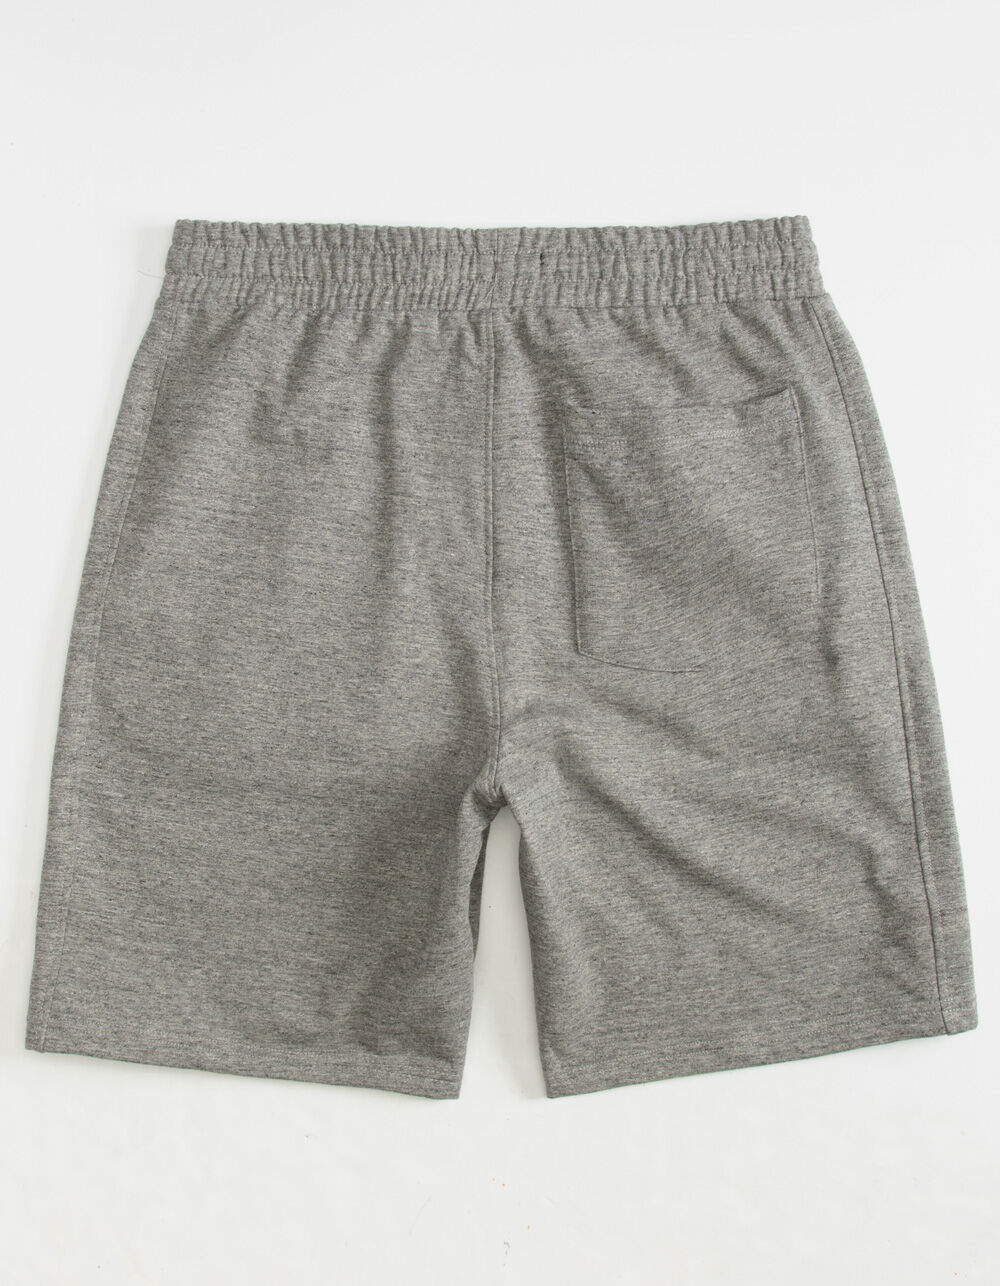 RSQ Mens Heather Gray Sweat Tillys | - Shorts GRAY HEATHER